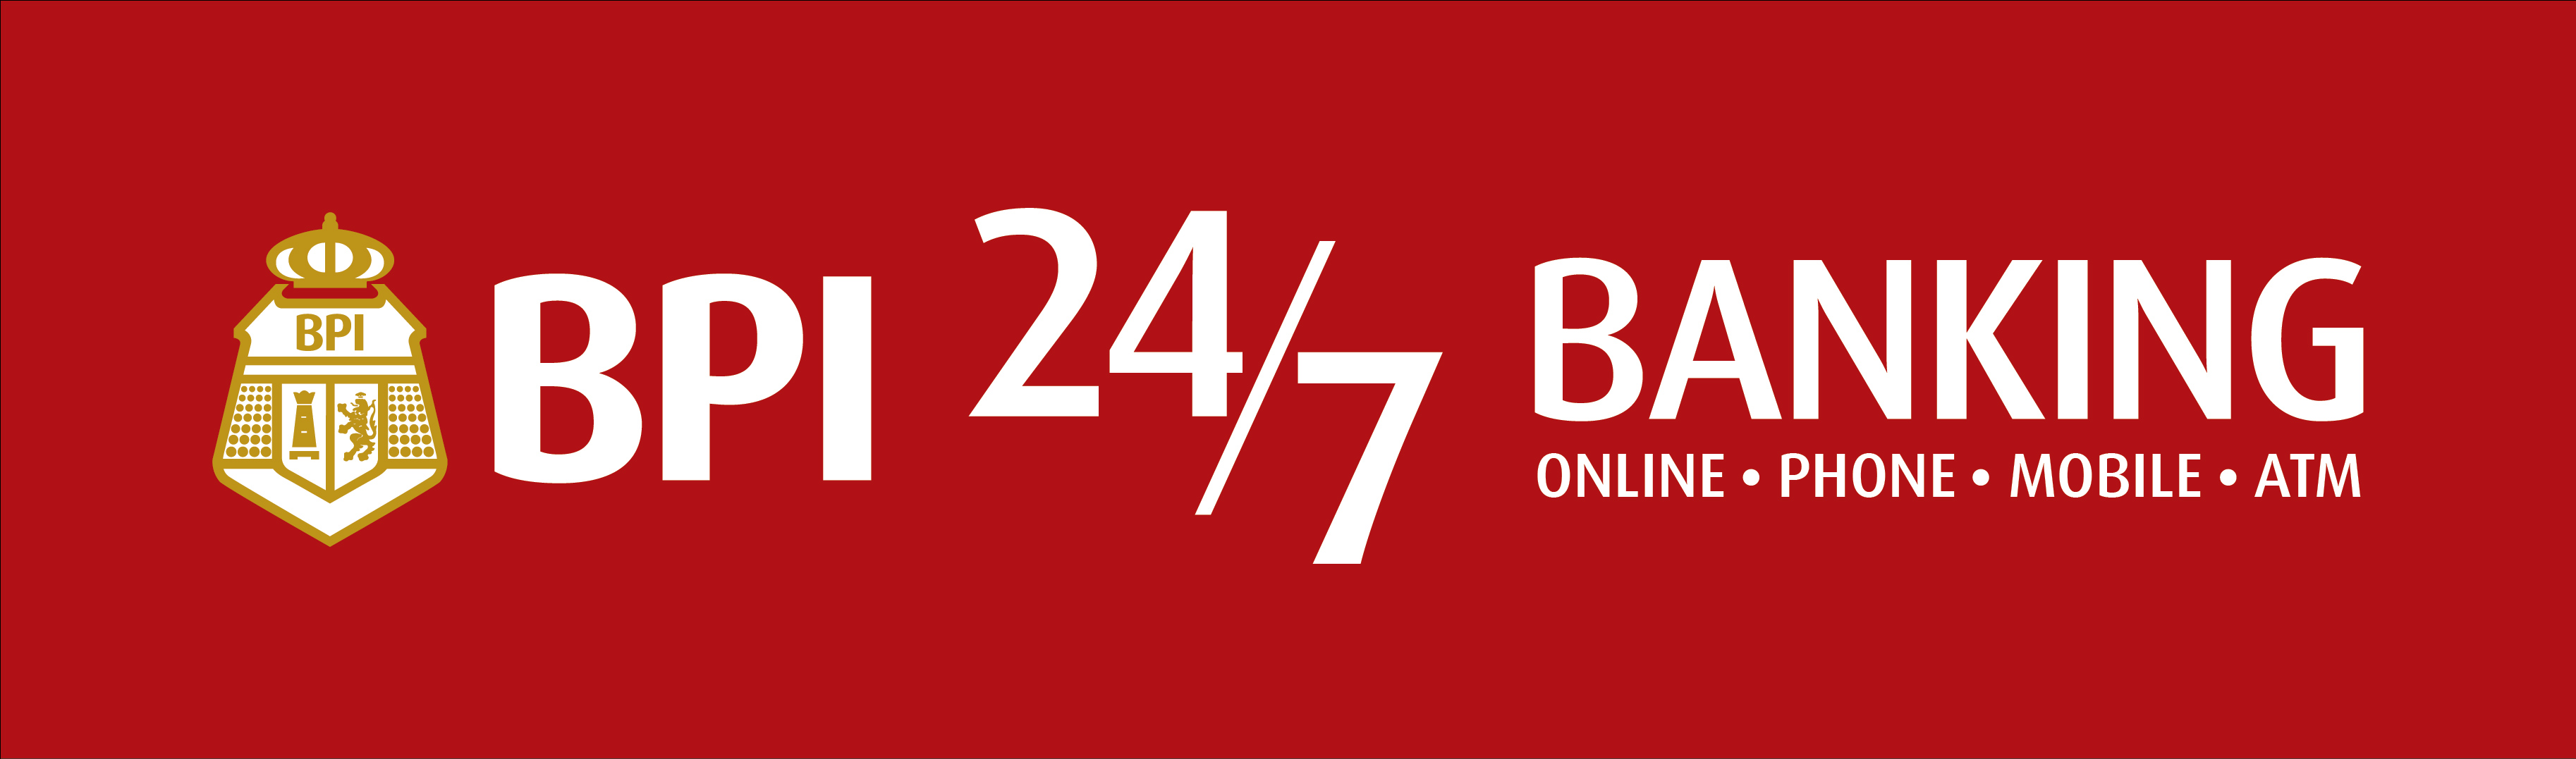 BPI 24/7’s Rewards Bill Payers with Brand New Tablets